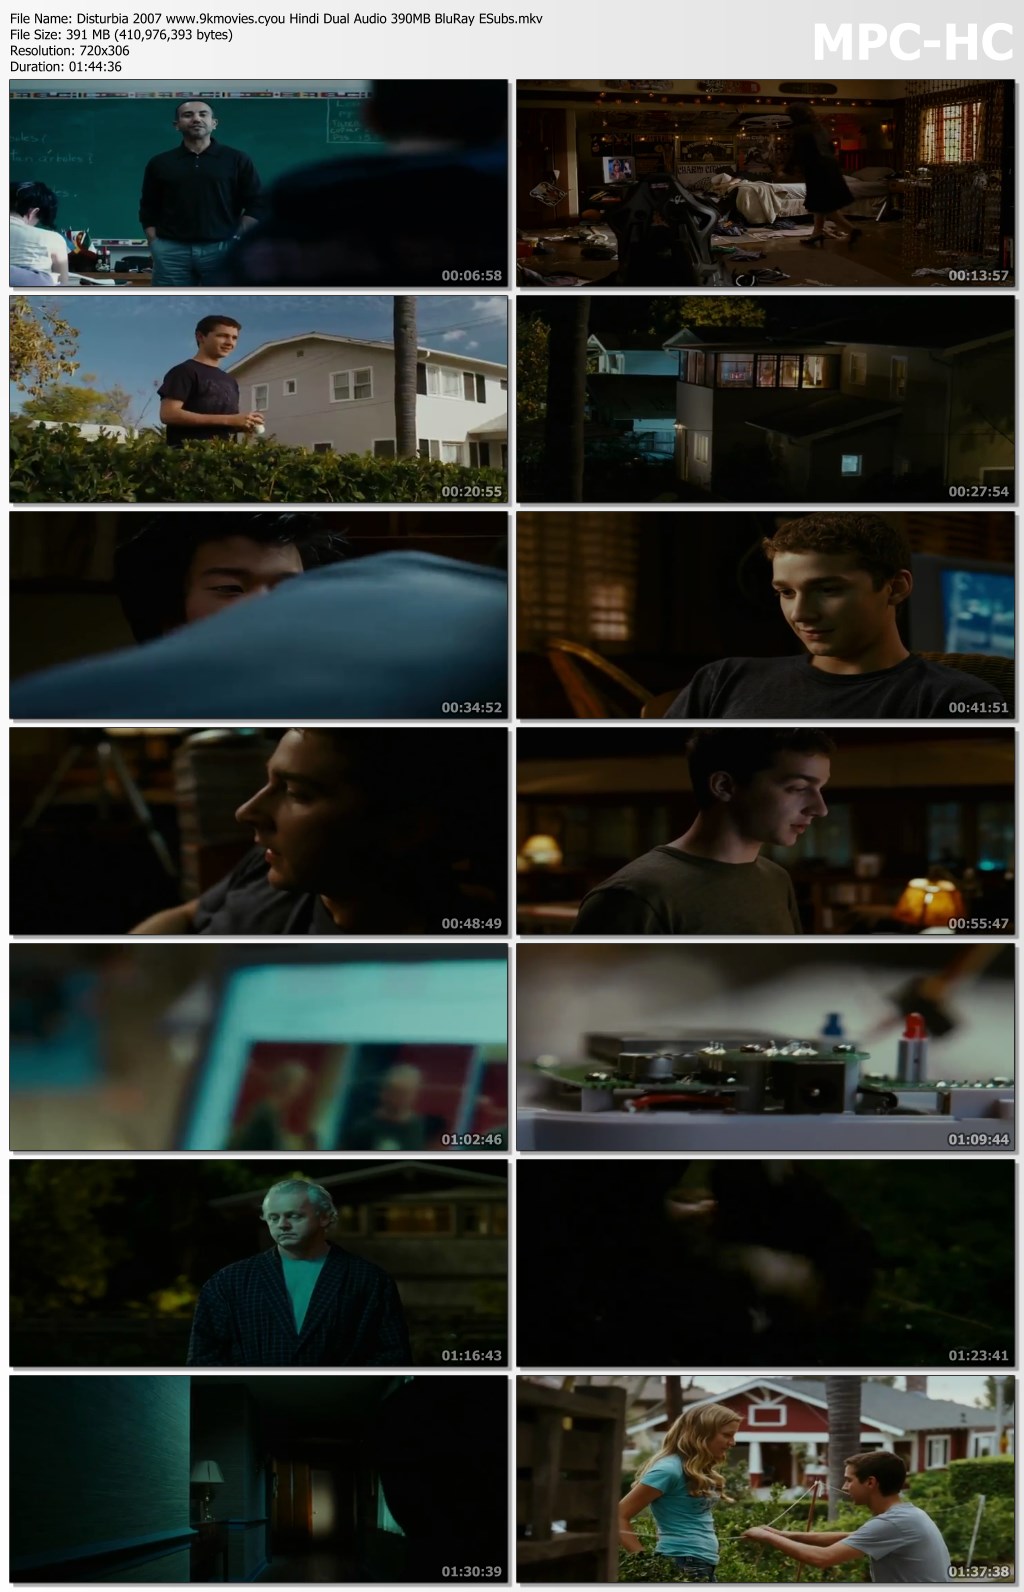 Disturbia 2007 Hindi Dual Audio 398mb Bluray Esubs Download 1xseries Sick of the examinations he underwent as a child and the interest of the government and medical establishment in his power. 1xseries